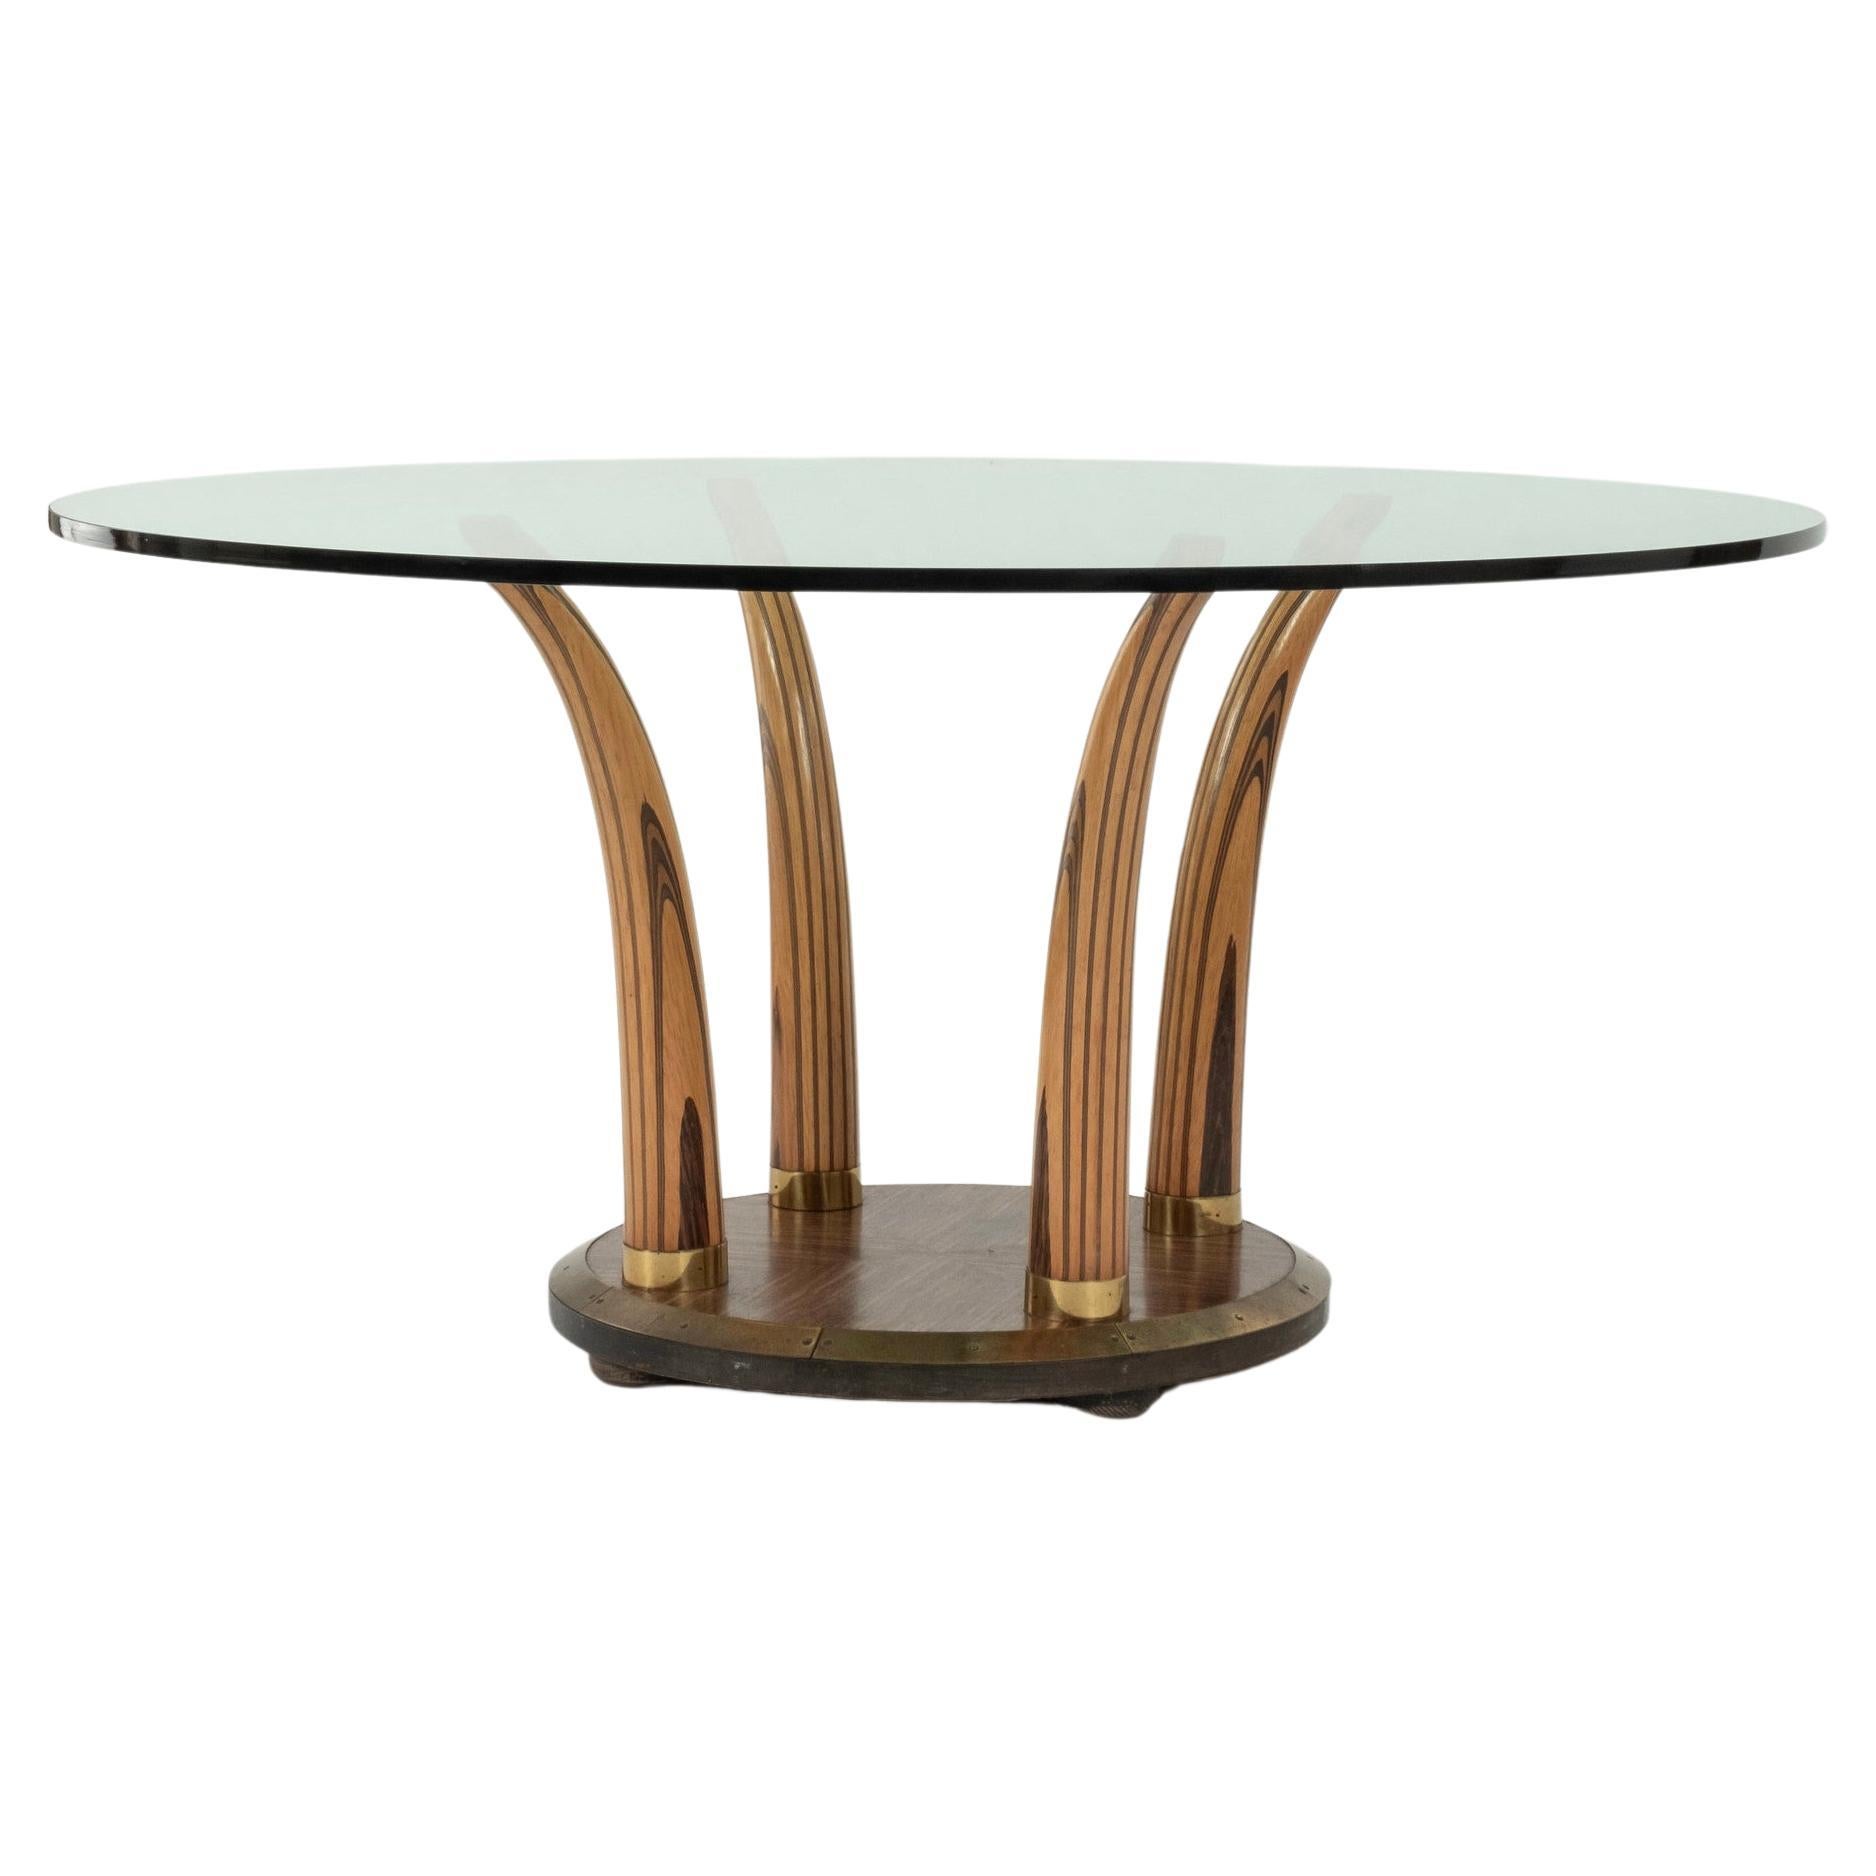 Zebra Wood Faux Tusk Dining Table With Glass Top For Sale